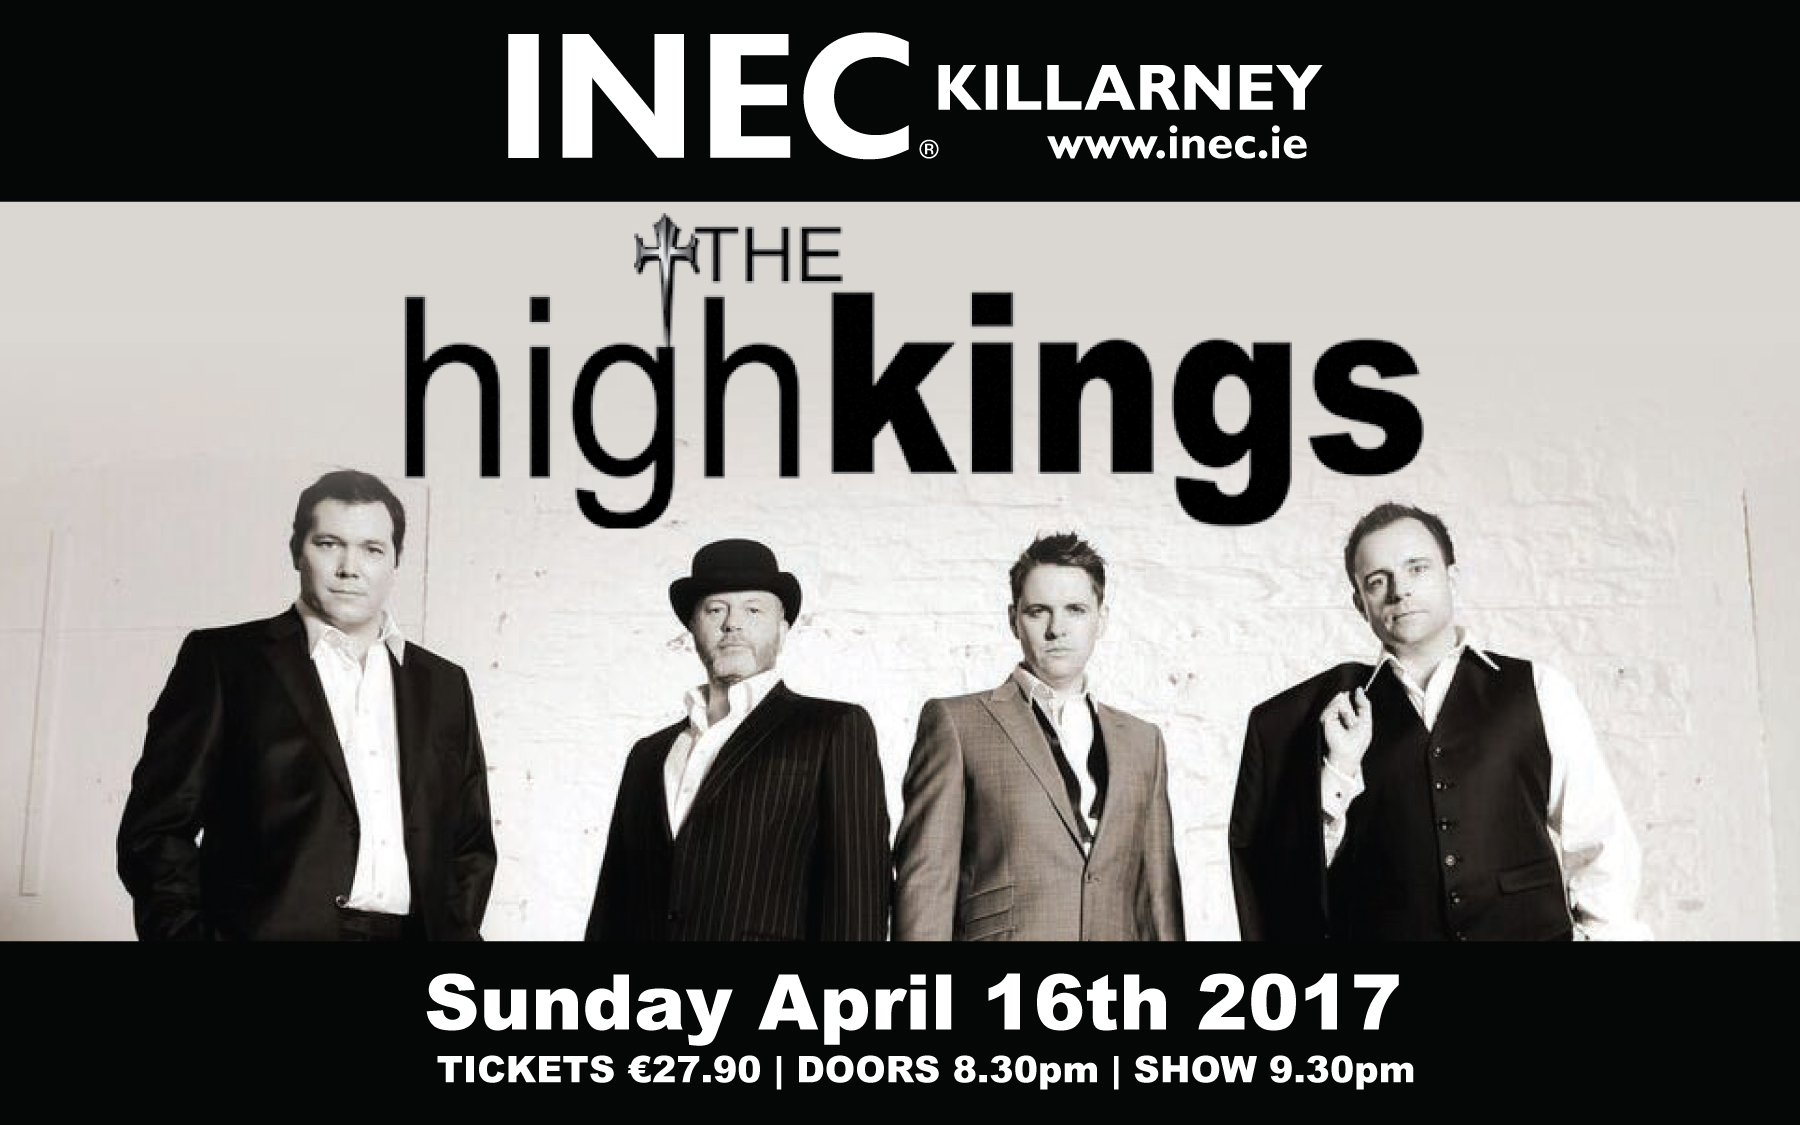 The High Kings return Easter Sunday, April 16th